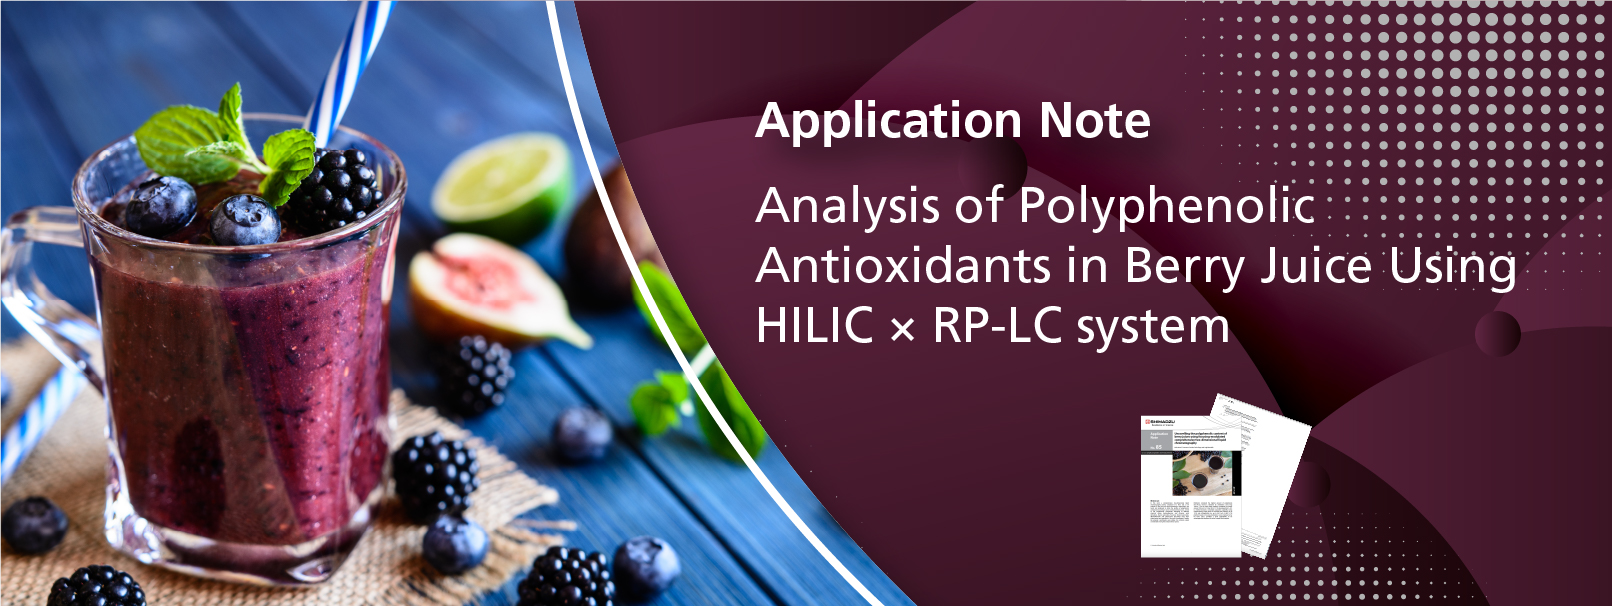 Analysis of Polypheonolic Antioxidants in Berry Juice Using HILIC x RP-LC System